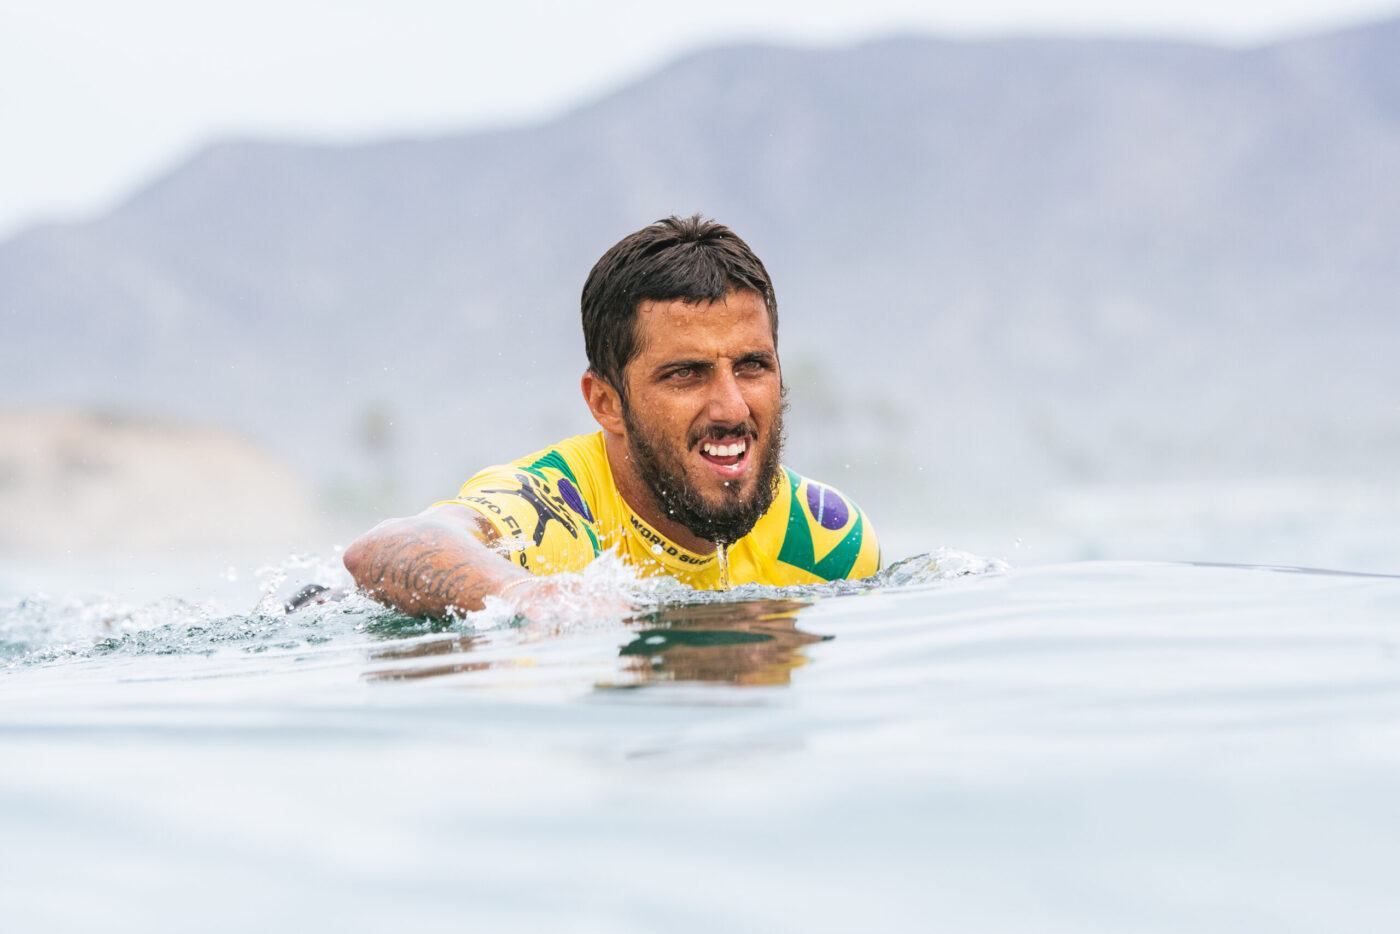 Reigning World Surfing Champion Stunningly Withdraws From Season Amid Mental Health Concerns